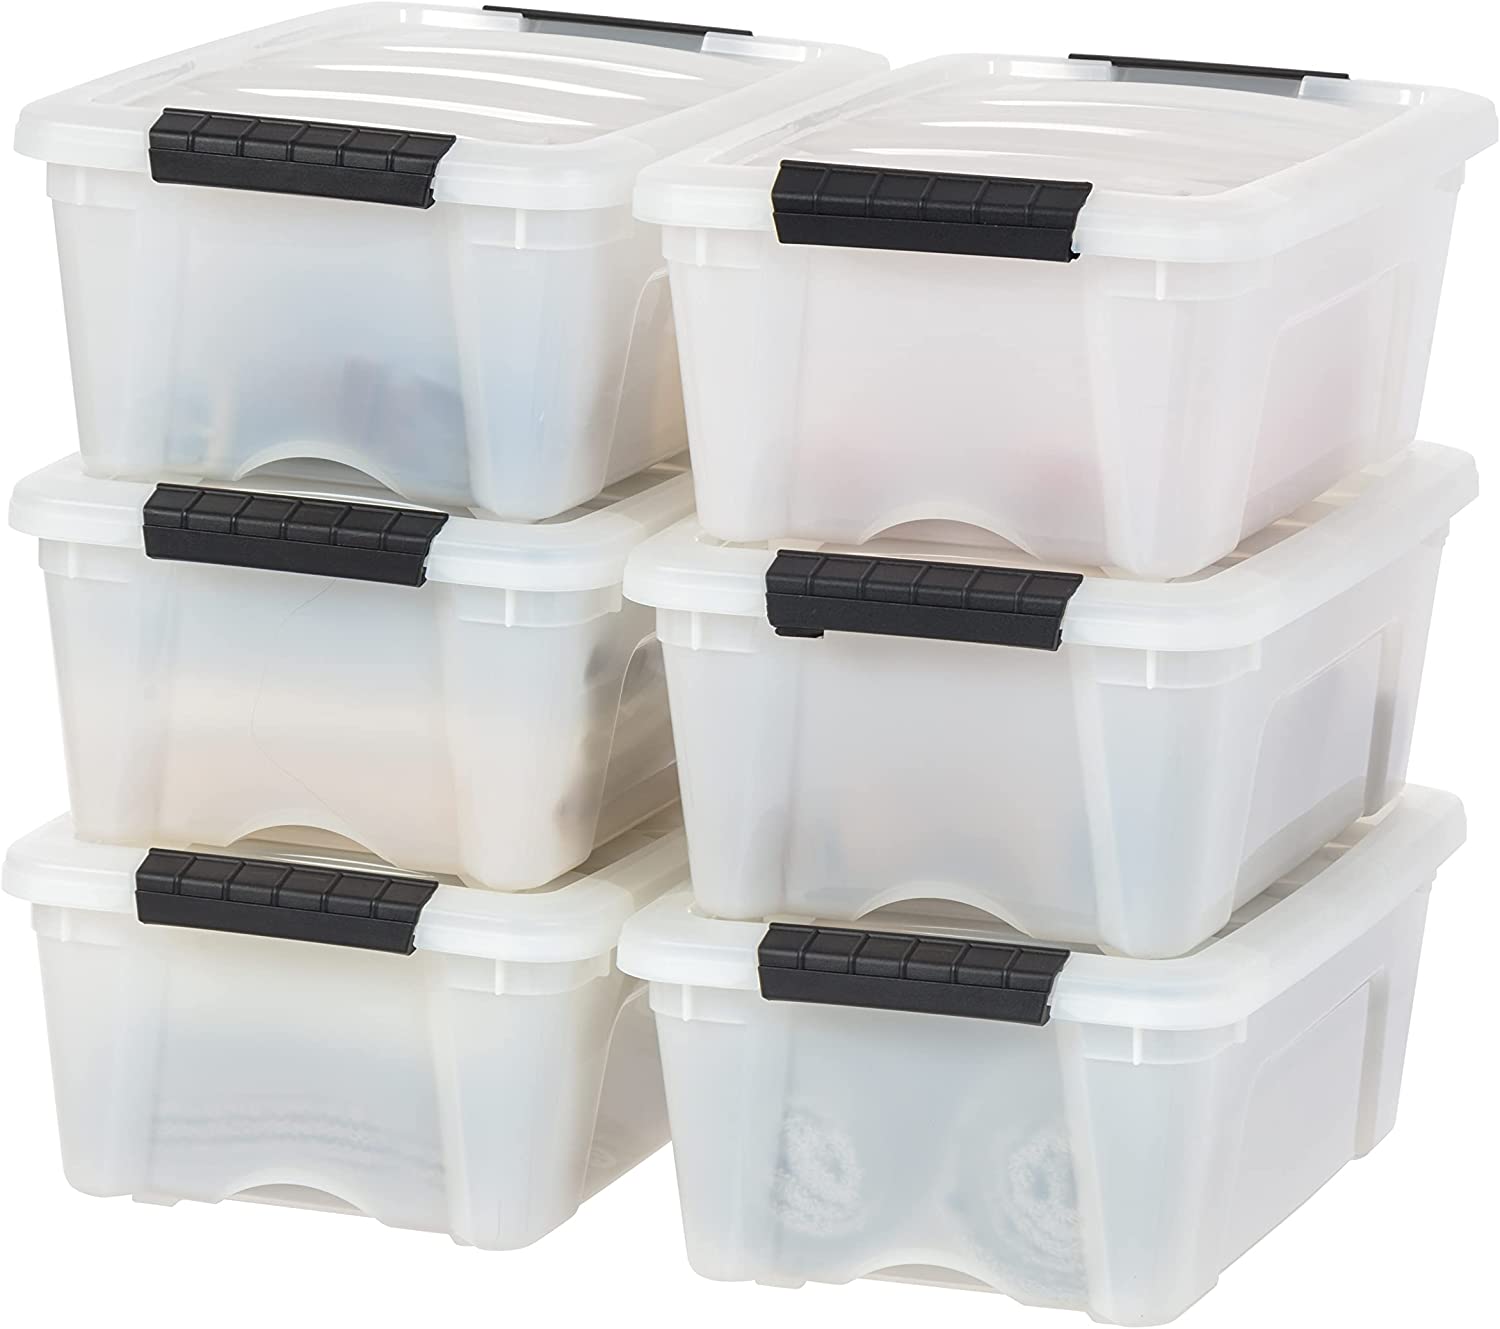 https://bigbigmart.com/wp-content/uploads/2023/06/IRIS-USA-12-Qt.-Plastic-Storage-Container-Bin-with-Secure-Lid-and-Latching-Buckles-6-pack-Pearl-Durable-Stackable-Nestable-Organizing-Tote-Tub-Box-Toy-General-Organization-Small.jpg